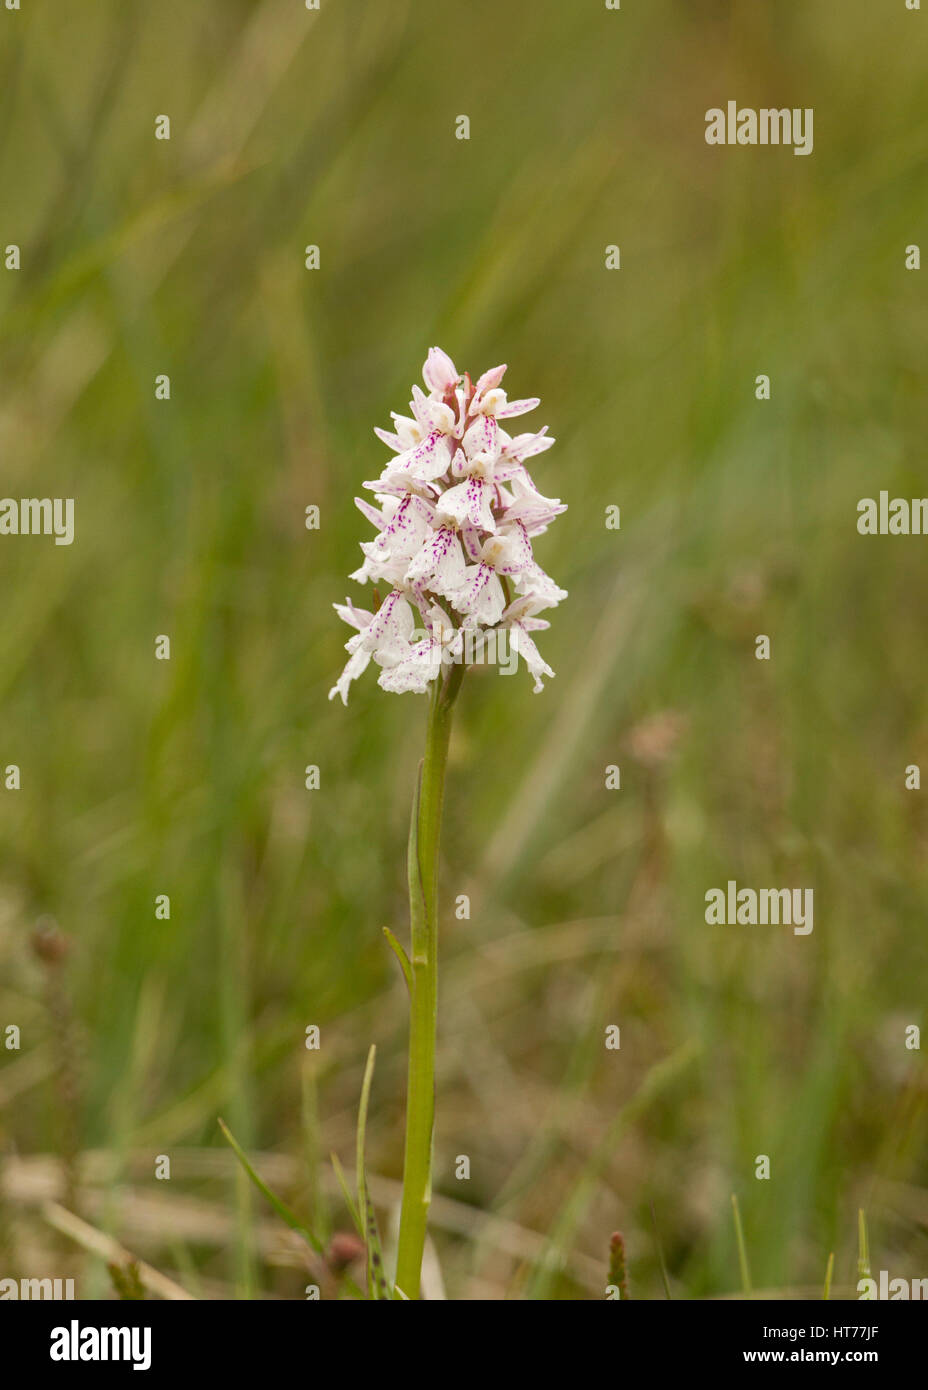 Heath Spotted-orchid, Dactylorhiza maculata, single flower spike growing on moorland, Findhorn Valley, The Highlands, Scotland, UK Stock Photo